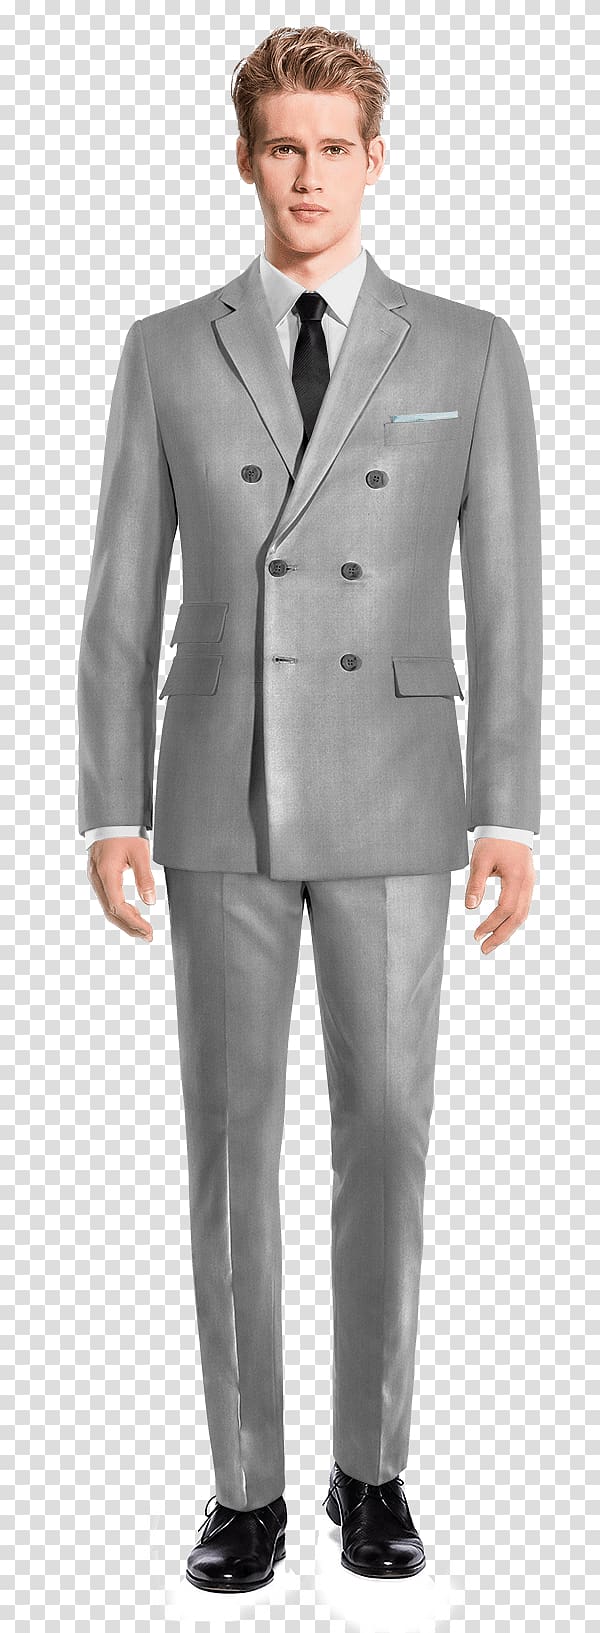 Suit Pants Upturned collar Wedding dress Sport coat, Double-breasted transparent background PNG clipart